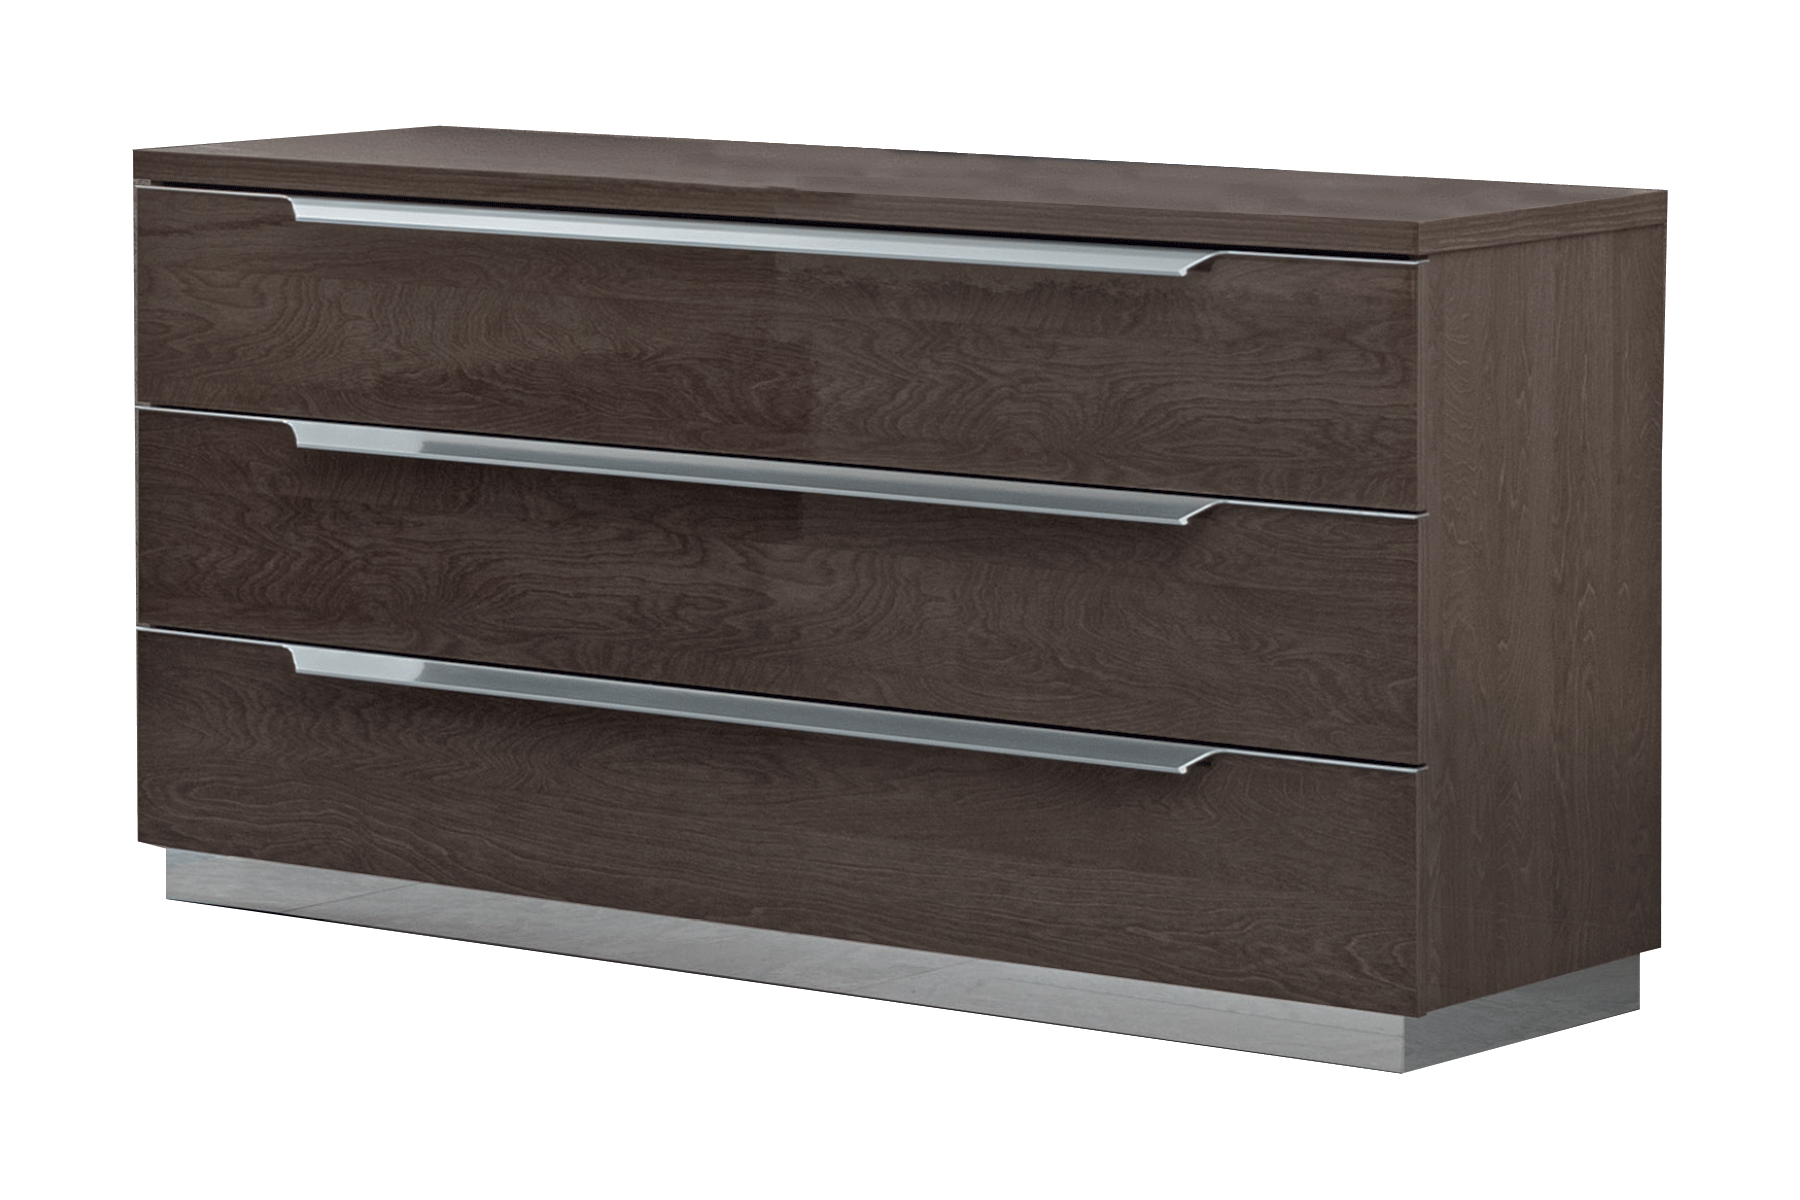 Brands Camel Classic Living Rooms, Italy Kroma SILVER Single dresser